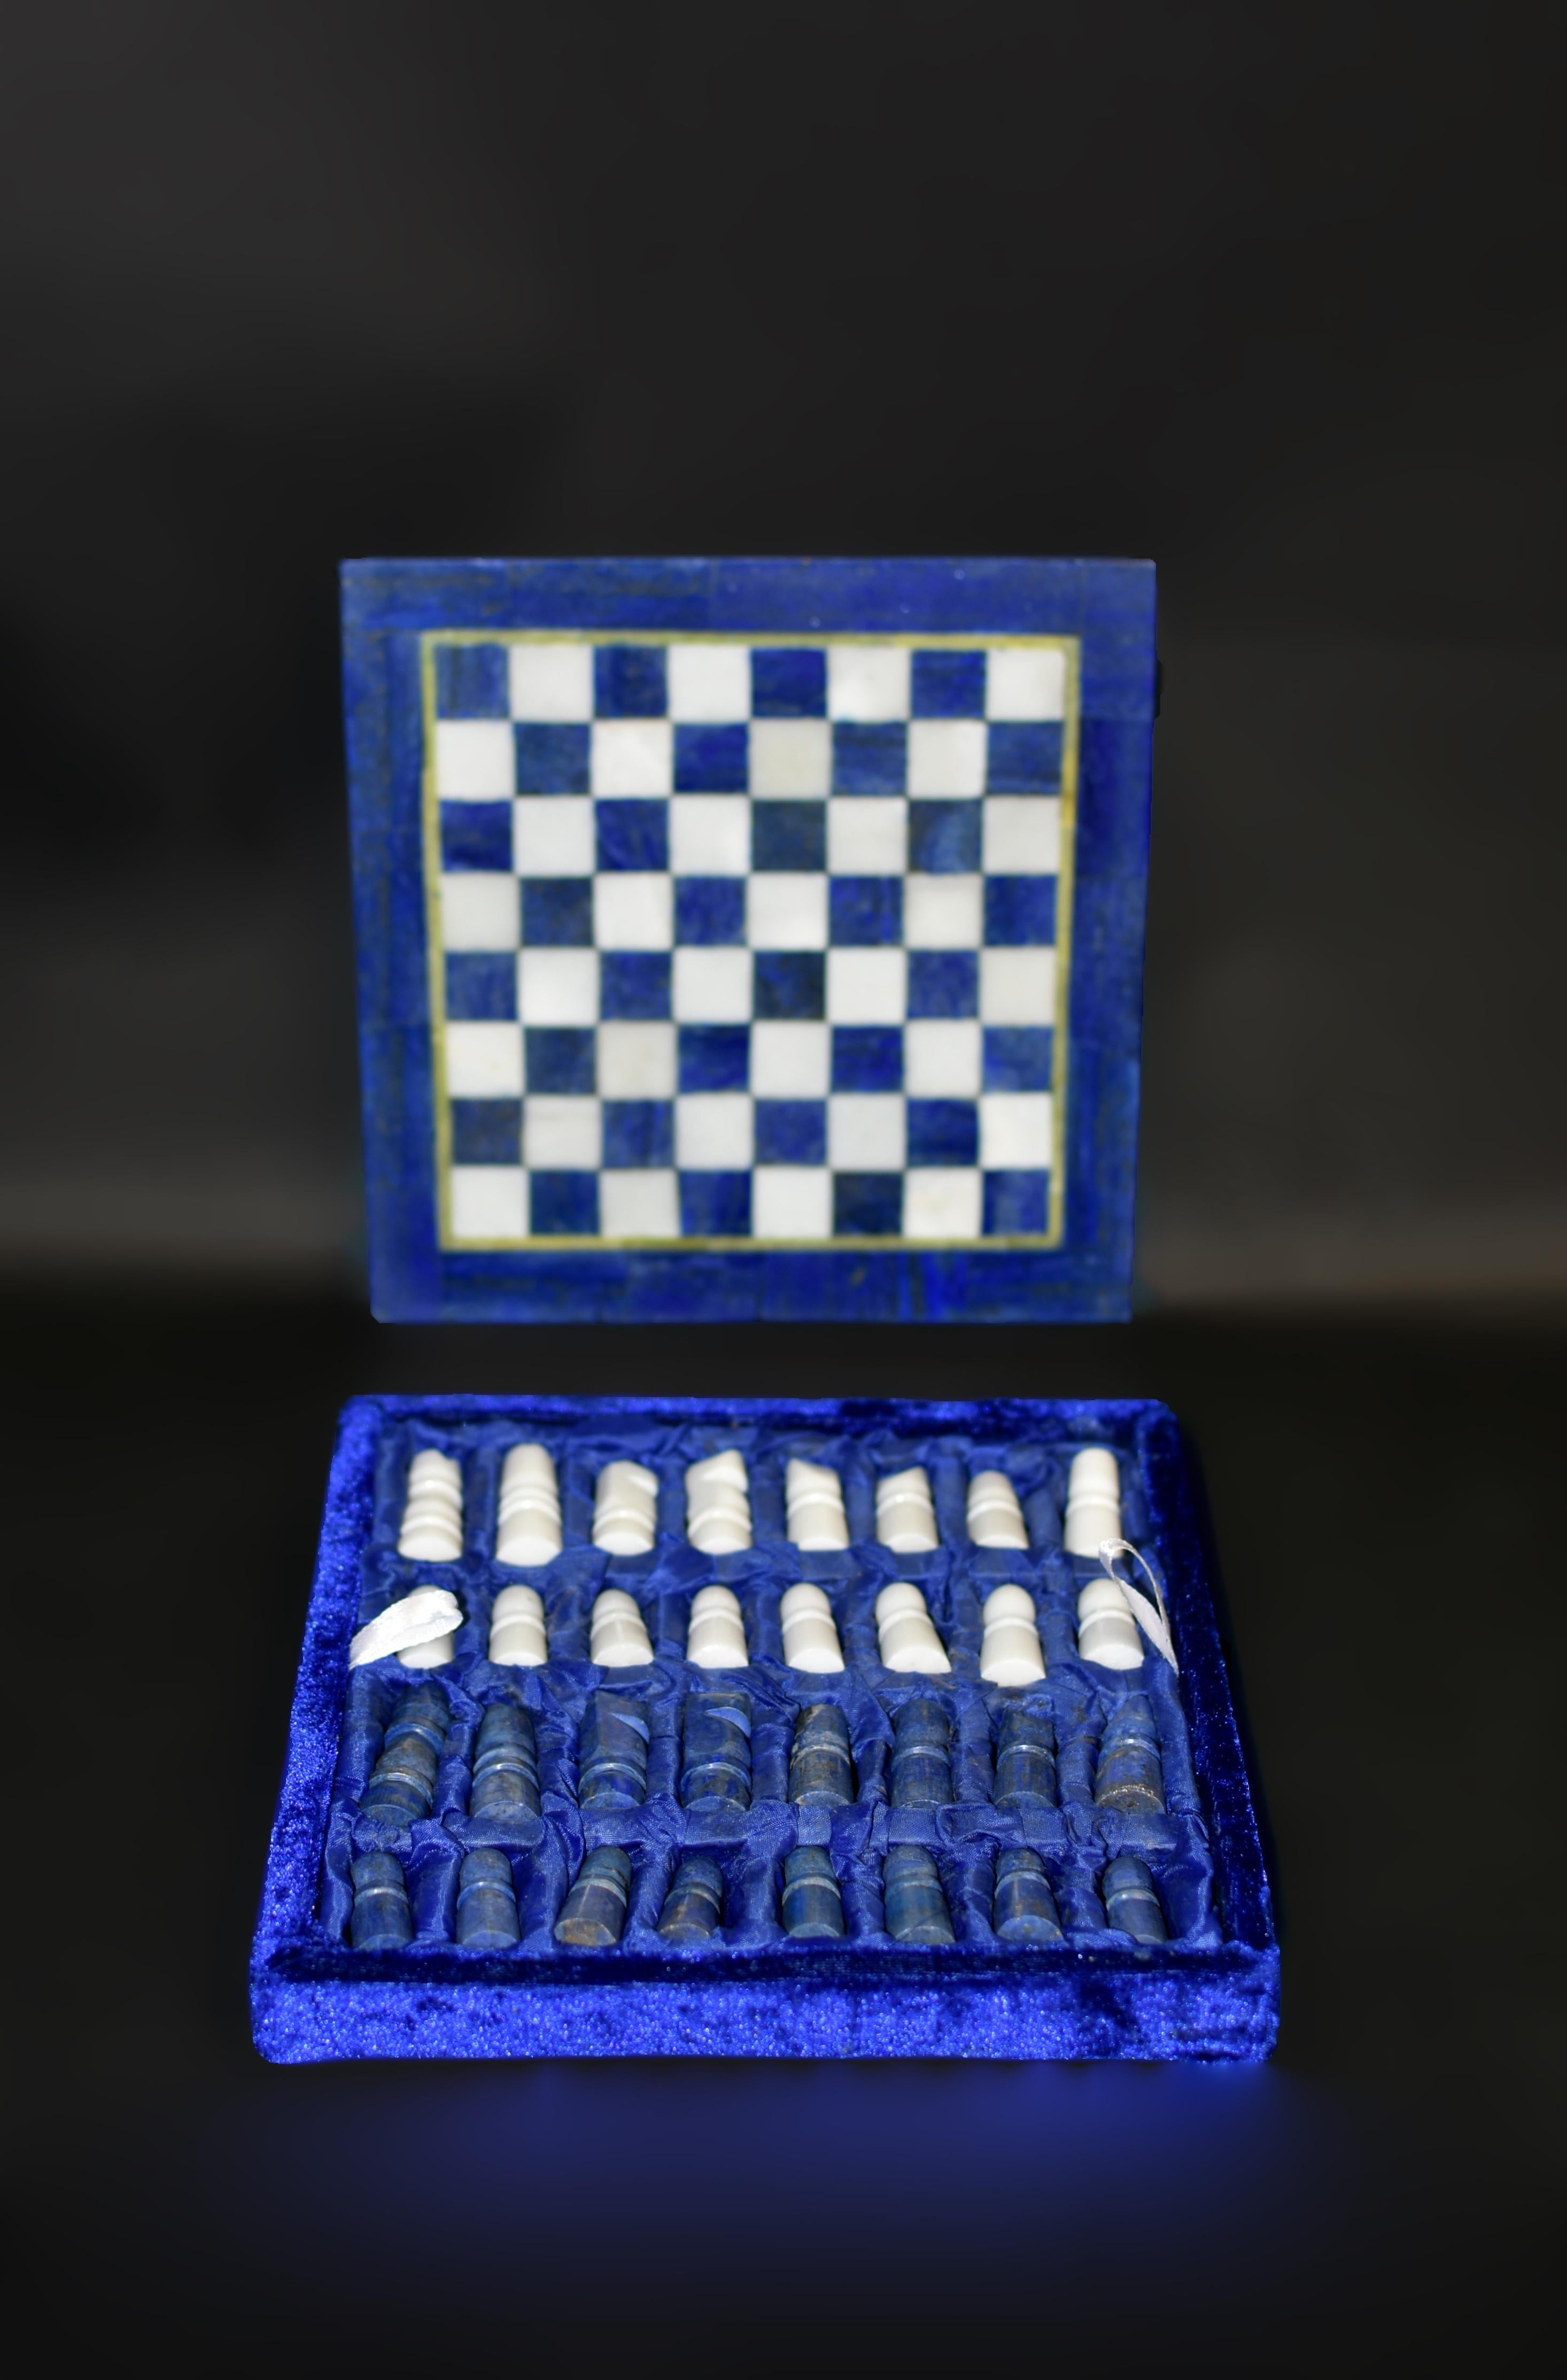 An elegant gemstone lapis and marble chess set, demonstrating traditional craftsmanship and wonderful artistry. The chessboard of solid marble base, showcases a classic design with hand-cut lapis lazuli and carrara marble squares, each meticulously